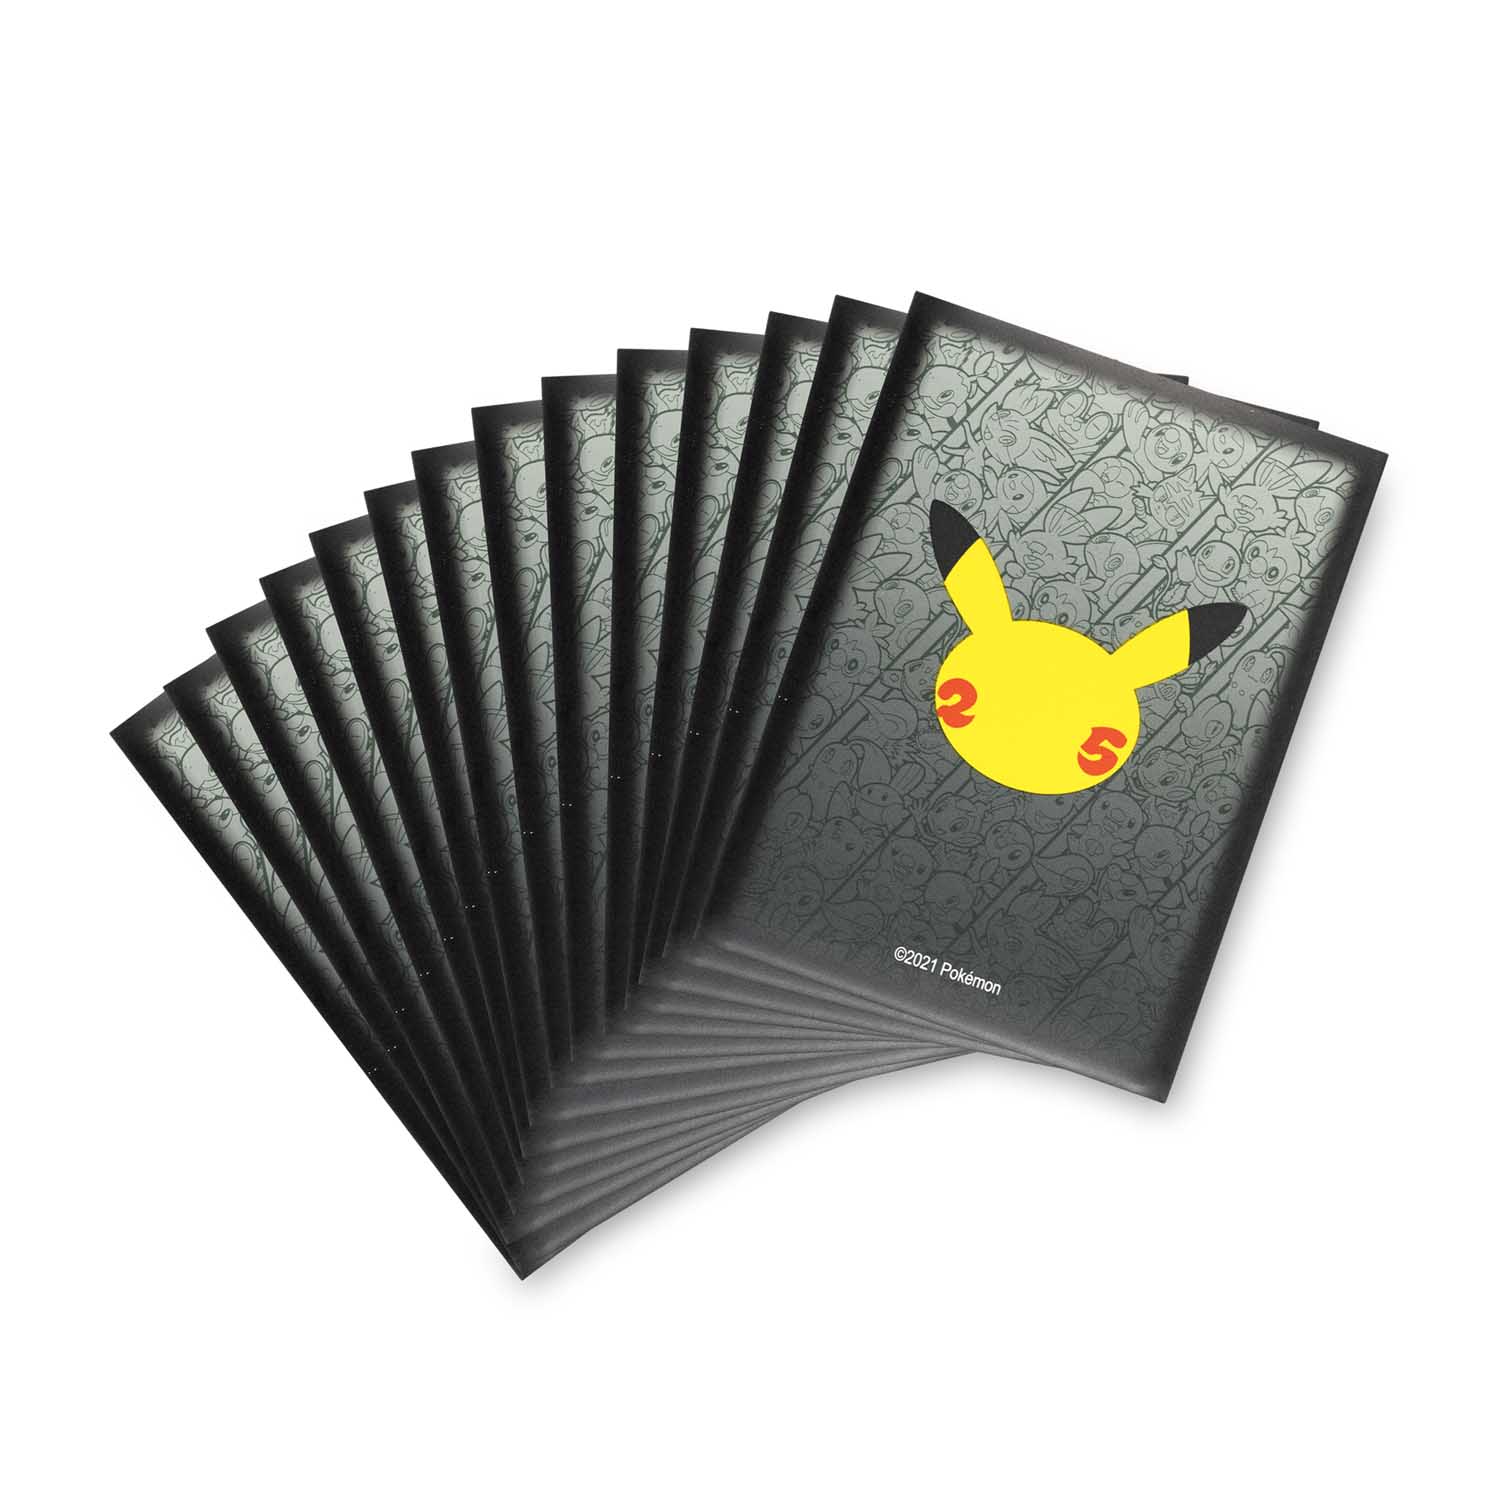 New Sealed Pokemon Celebrations 25th Anniversary Trading Card Sleeves Pack 65 